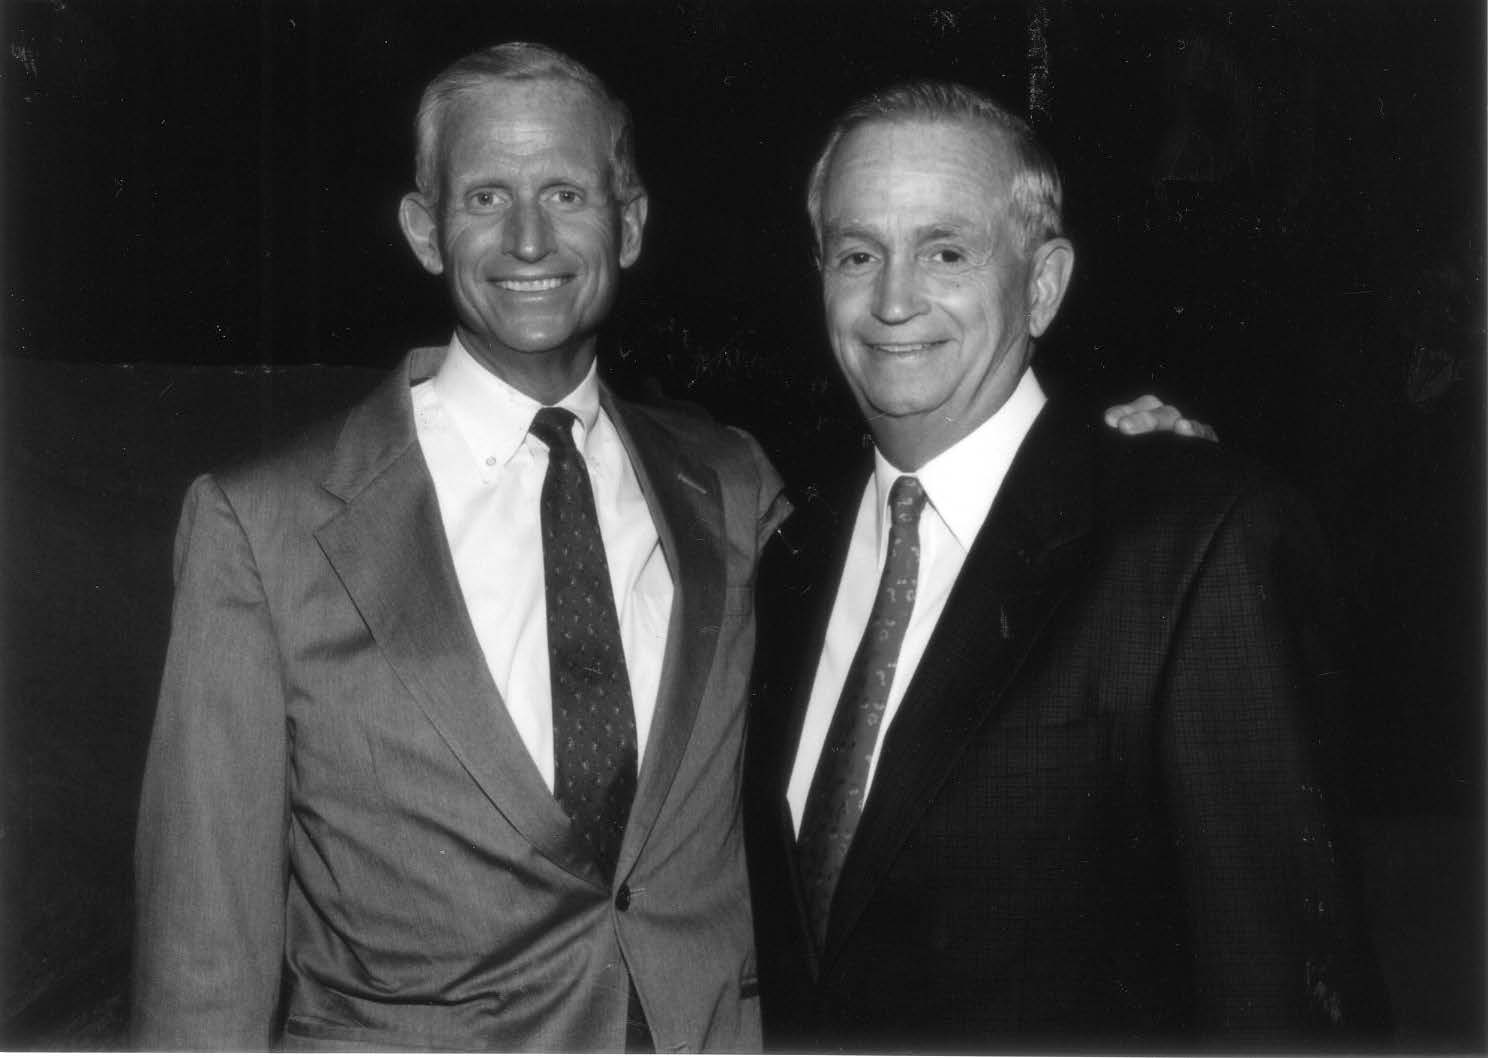 Dick and Bill Marriott at Camelback for Bill’s birthday party, 1997.